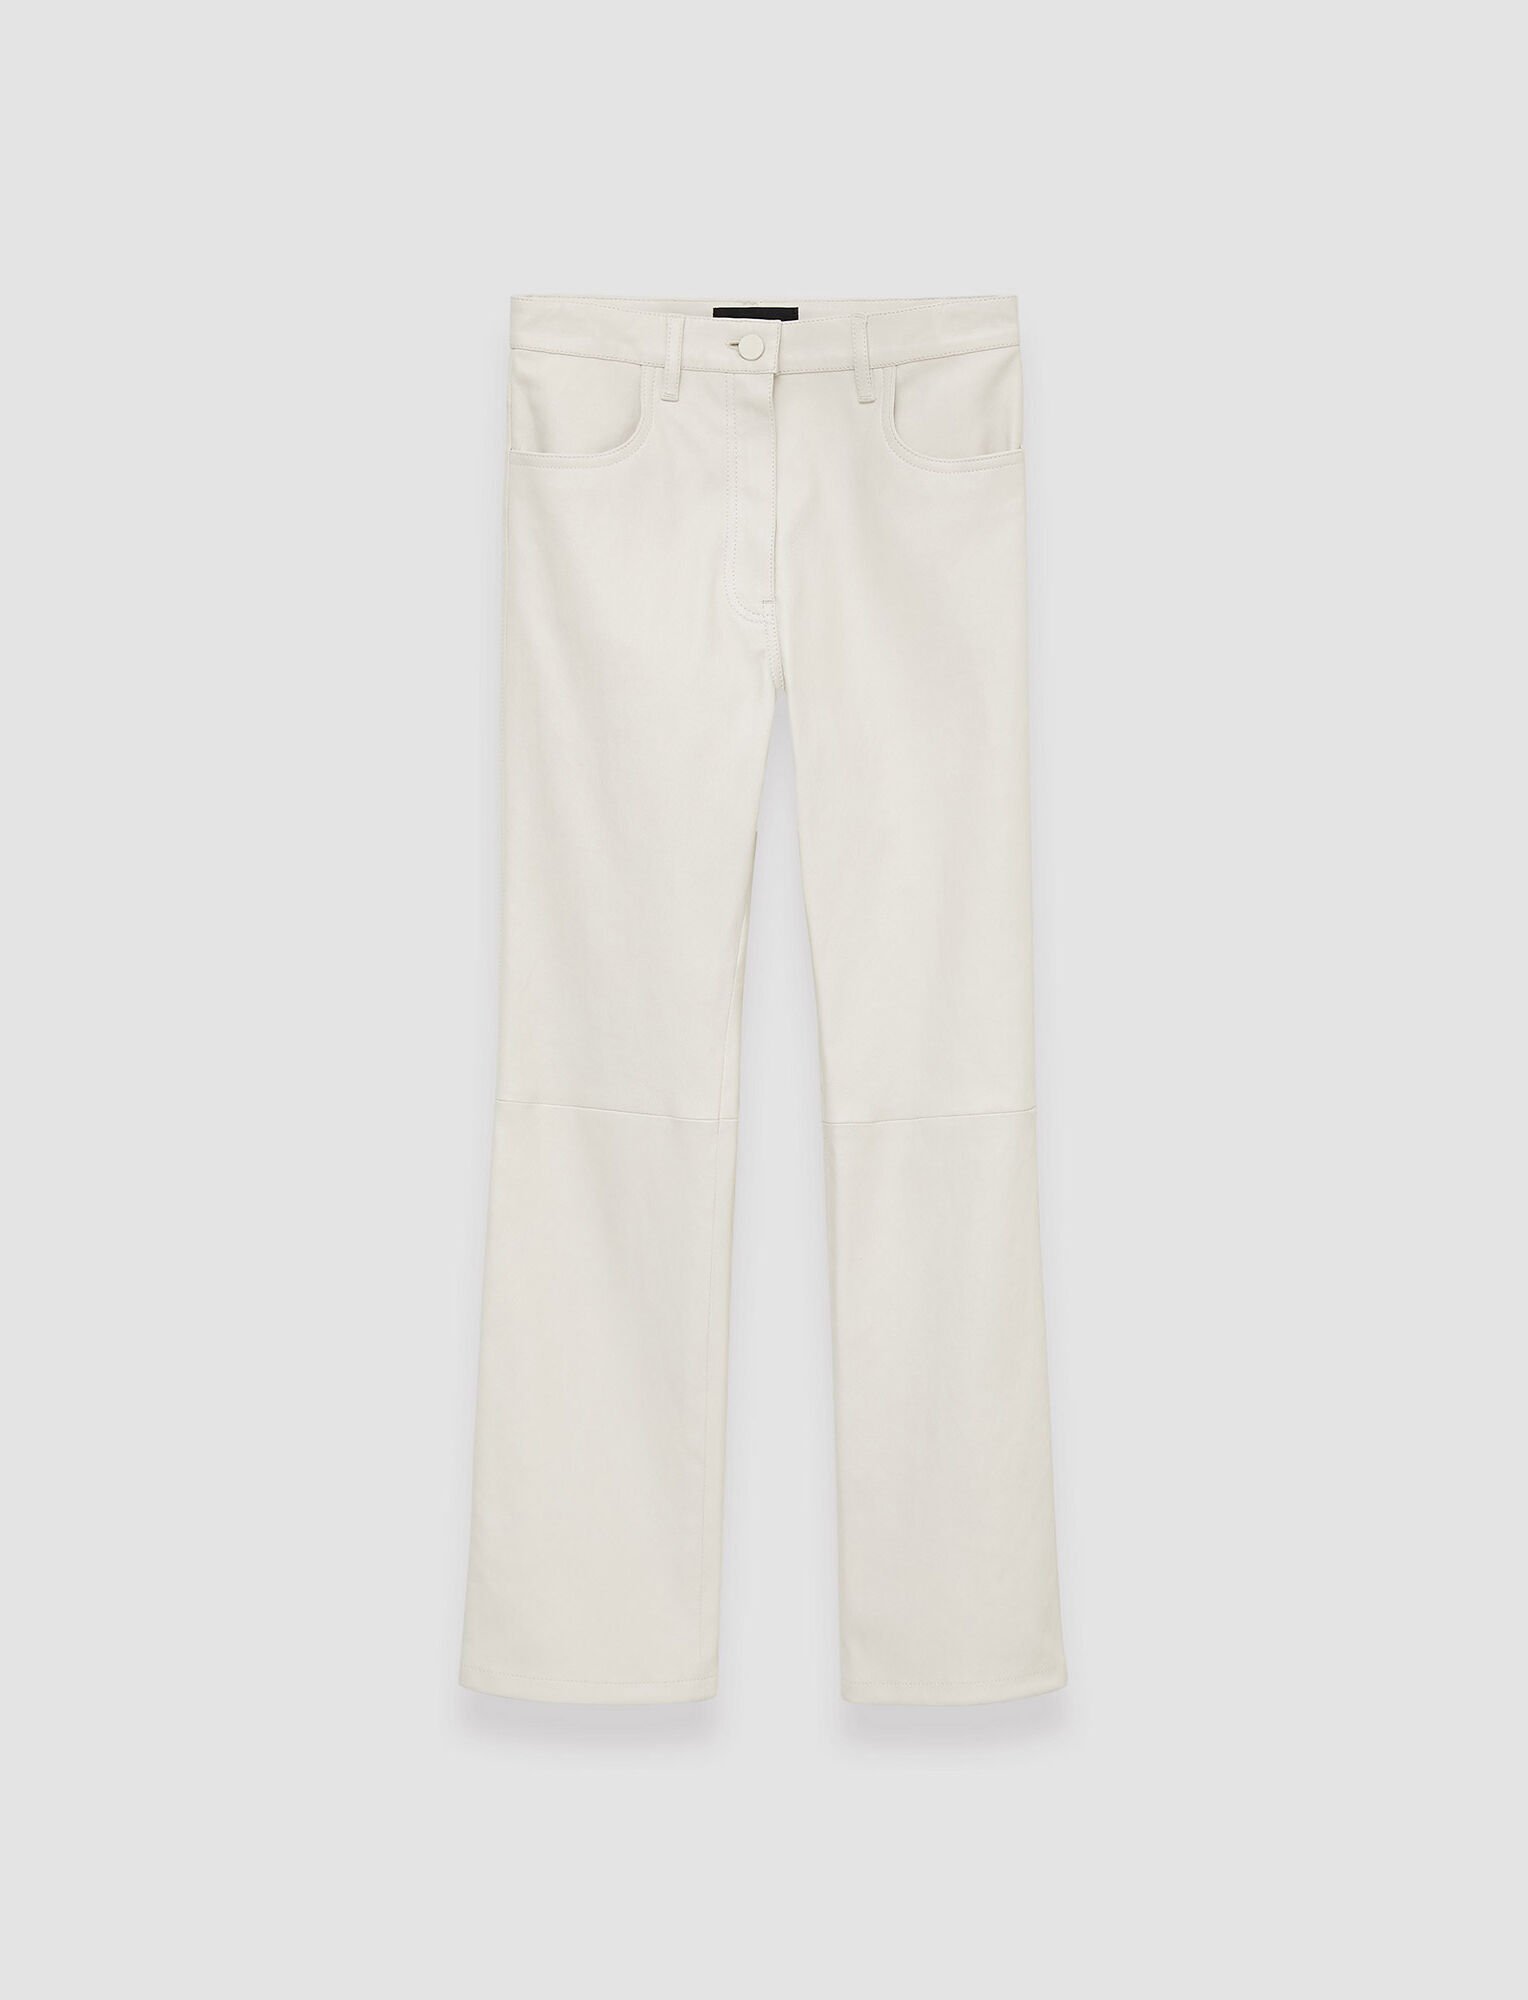 Joseph, Leather Stretch Duke Trousers, in Oyster White